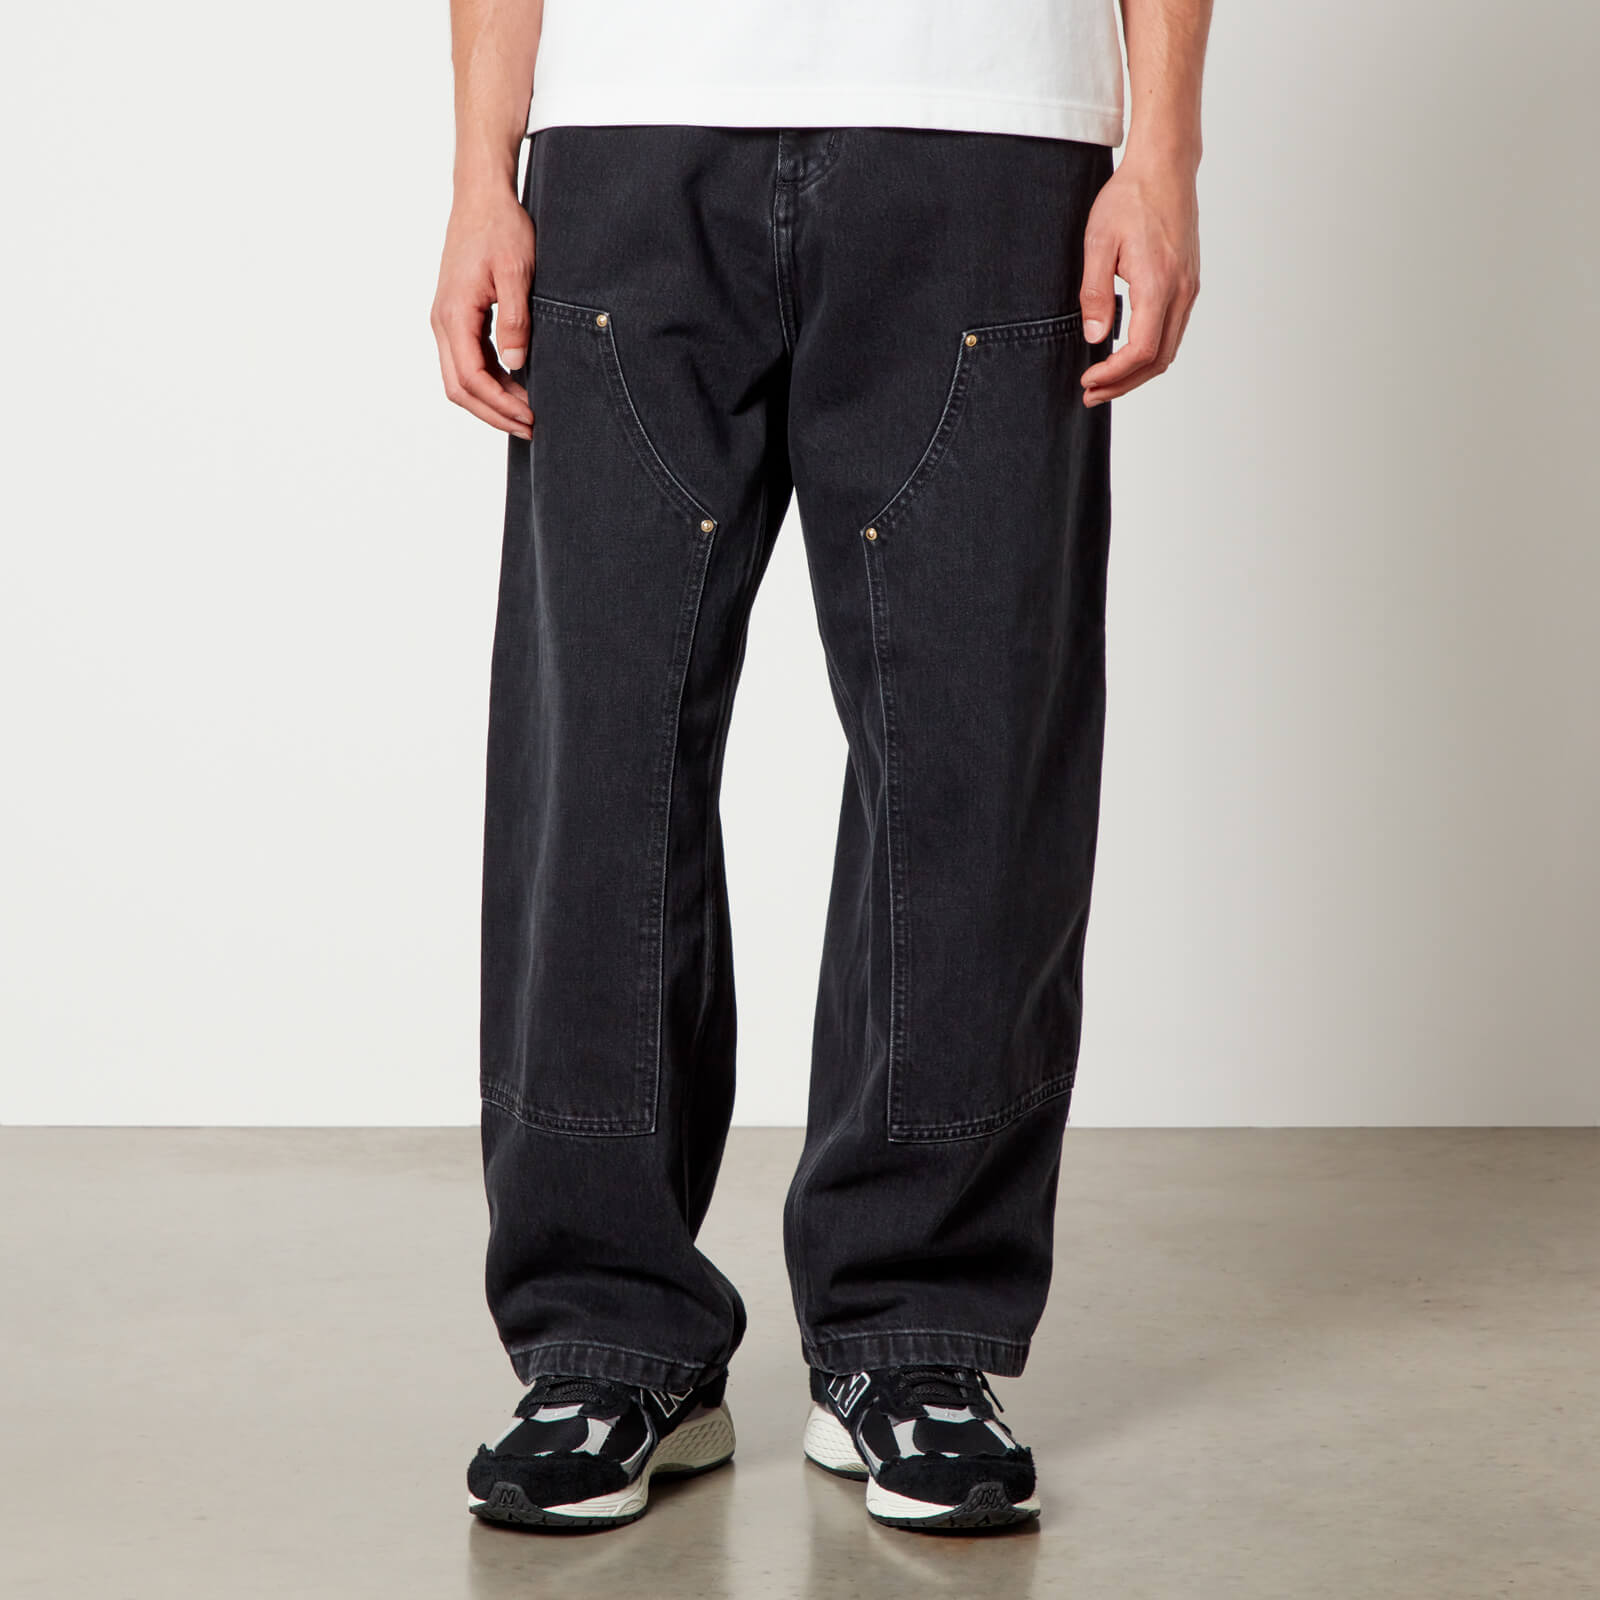 Women's Pierce Pant Straight in Black stone washed